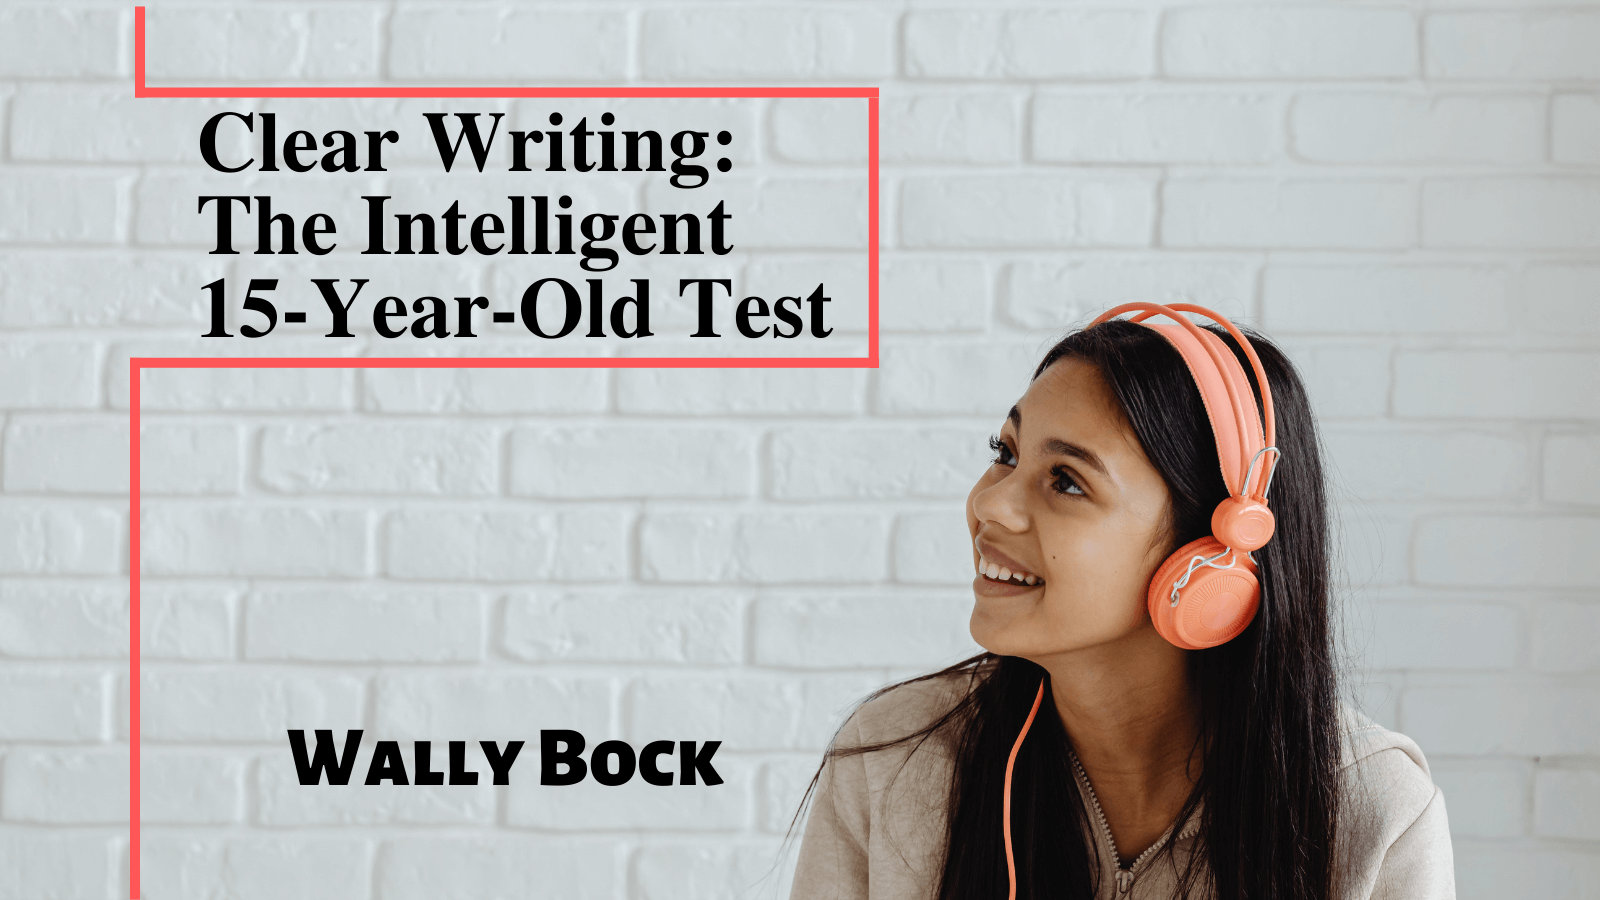 Better Writing: The Intelligent 15-Year-Old Critic